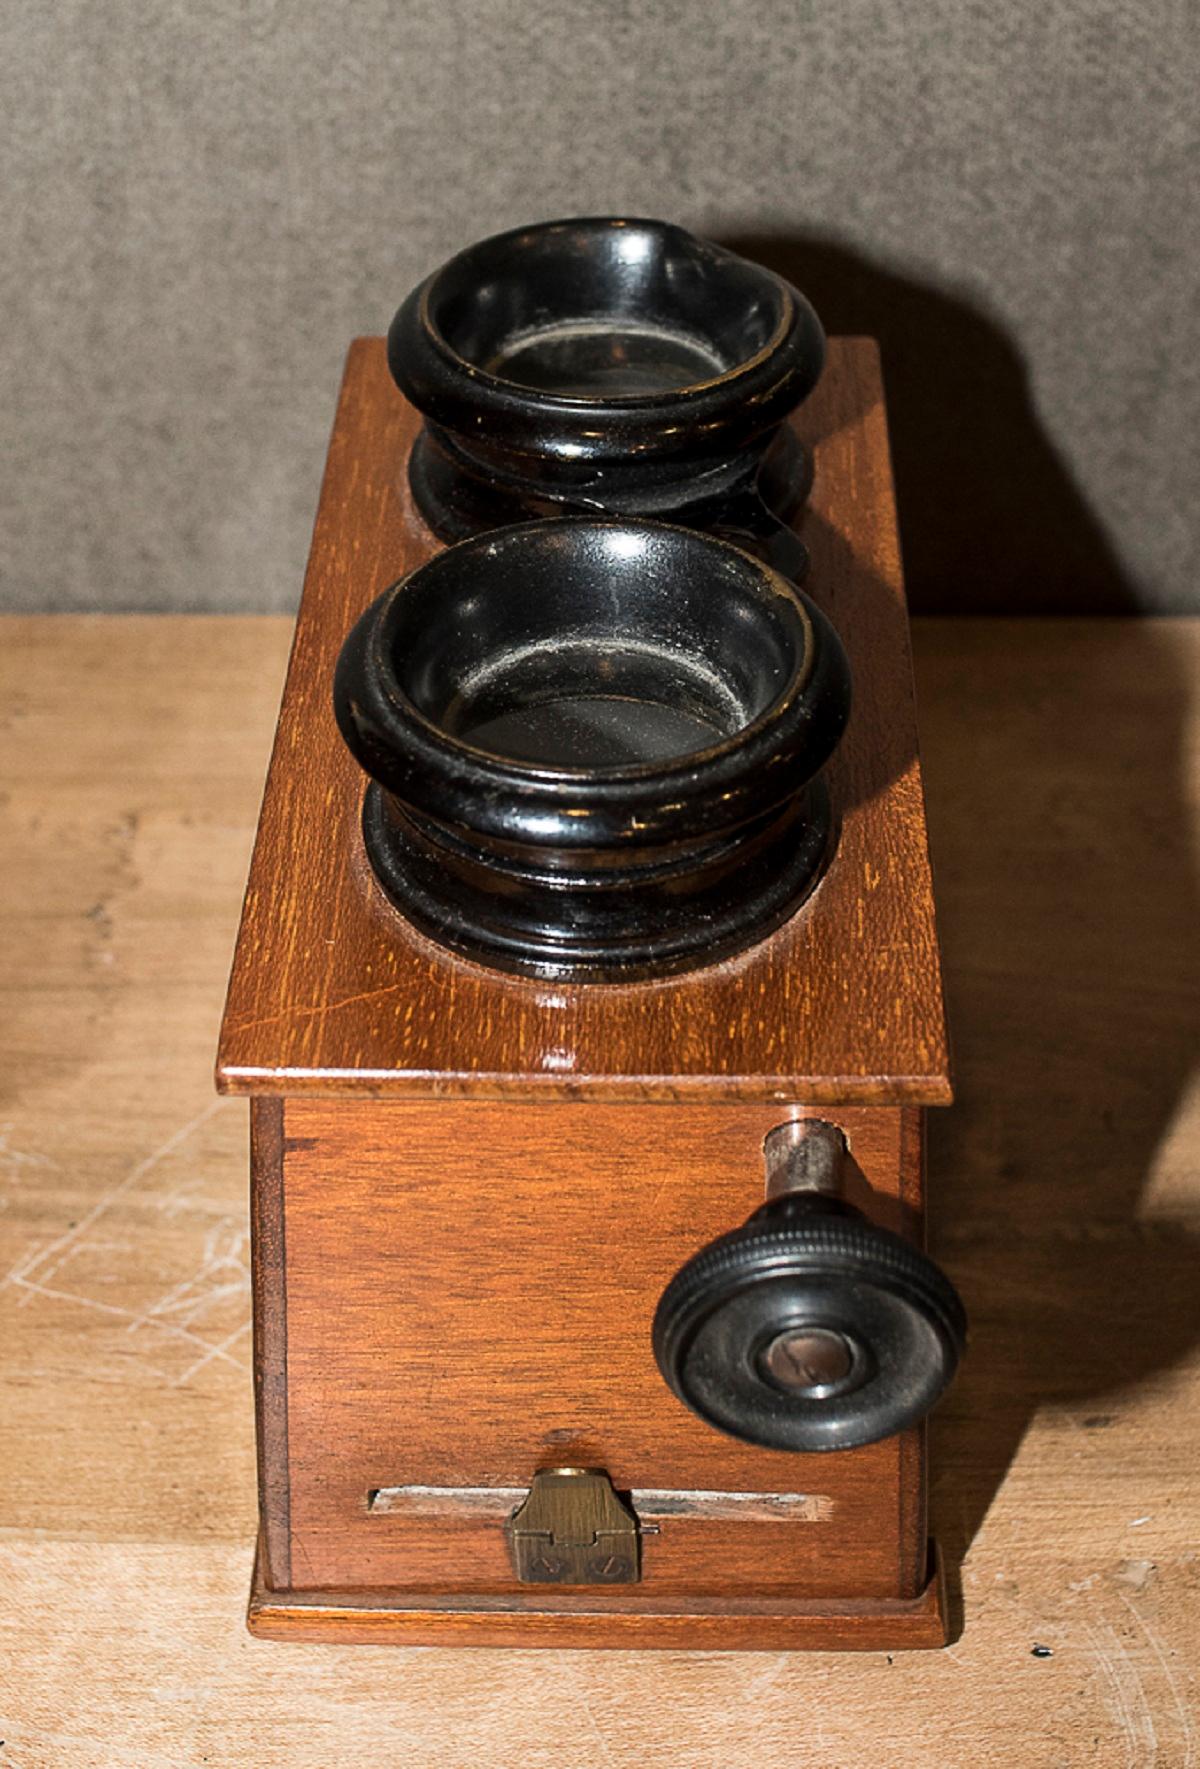 Hand-Crafted Edwardian Mahogany English Stereoscope or Old Photo Viewer